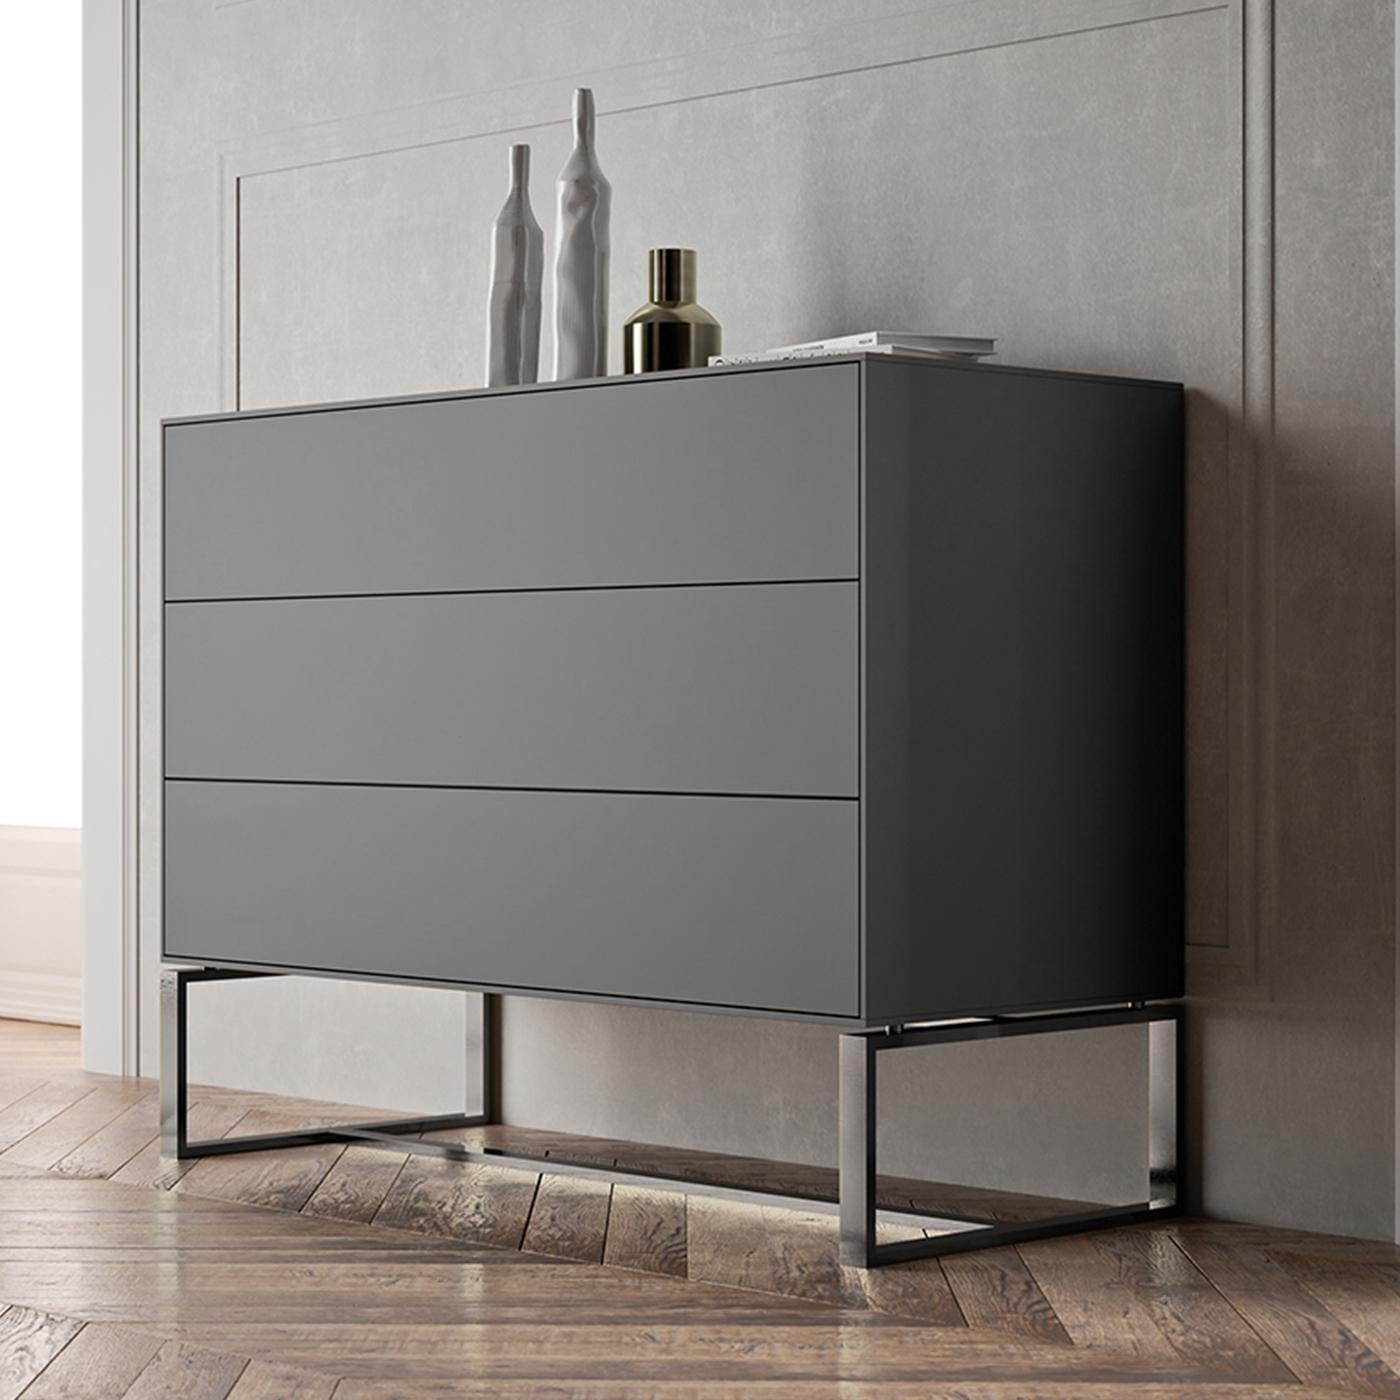 As suggested by its name, this dresser boasts a design that recalls the sleek aesthetic of modern technological innovations with its angular profile and cool color palette. The matte-gray lacquered MDF frame is supported by a streamlined iron base